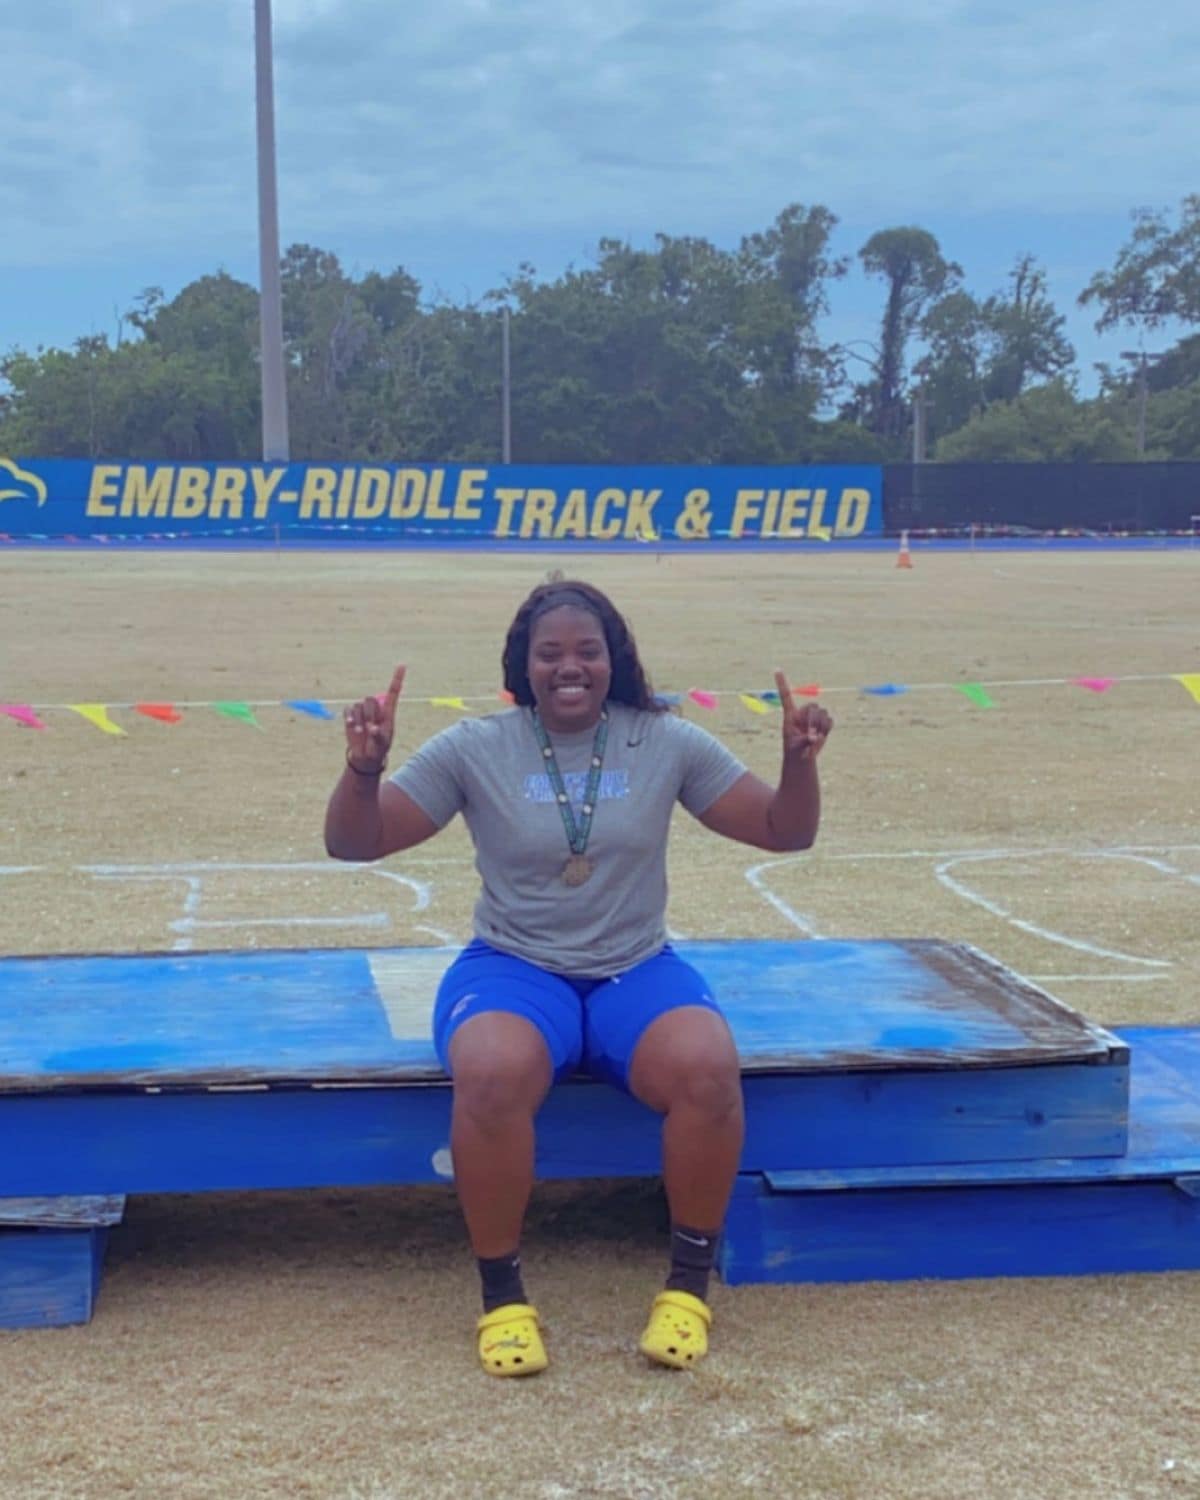 Ta'Leah Adams on Embry-Riddle’s Daytona Beach Campus, posing with the Track & Field sign. (Photo: Ta'Leah Adams)